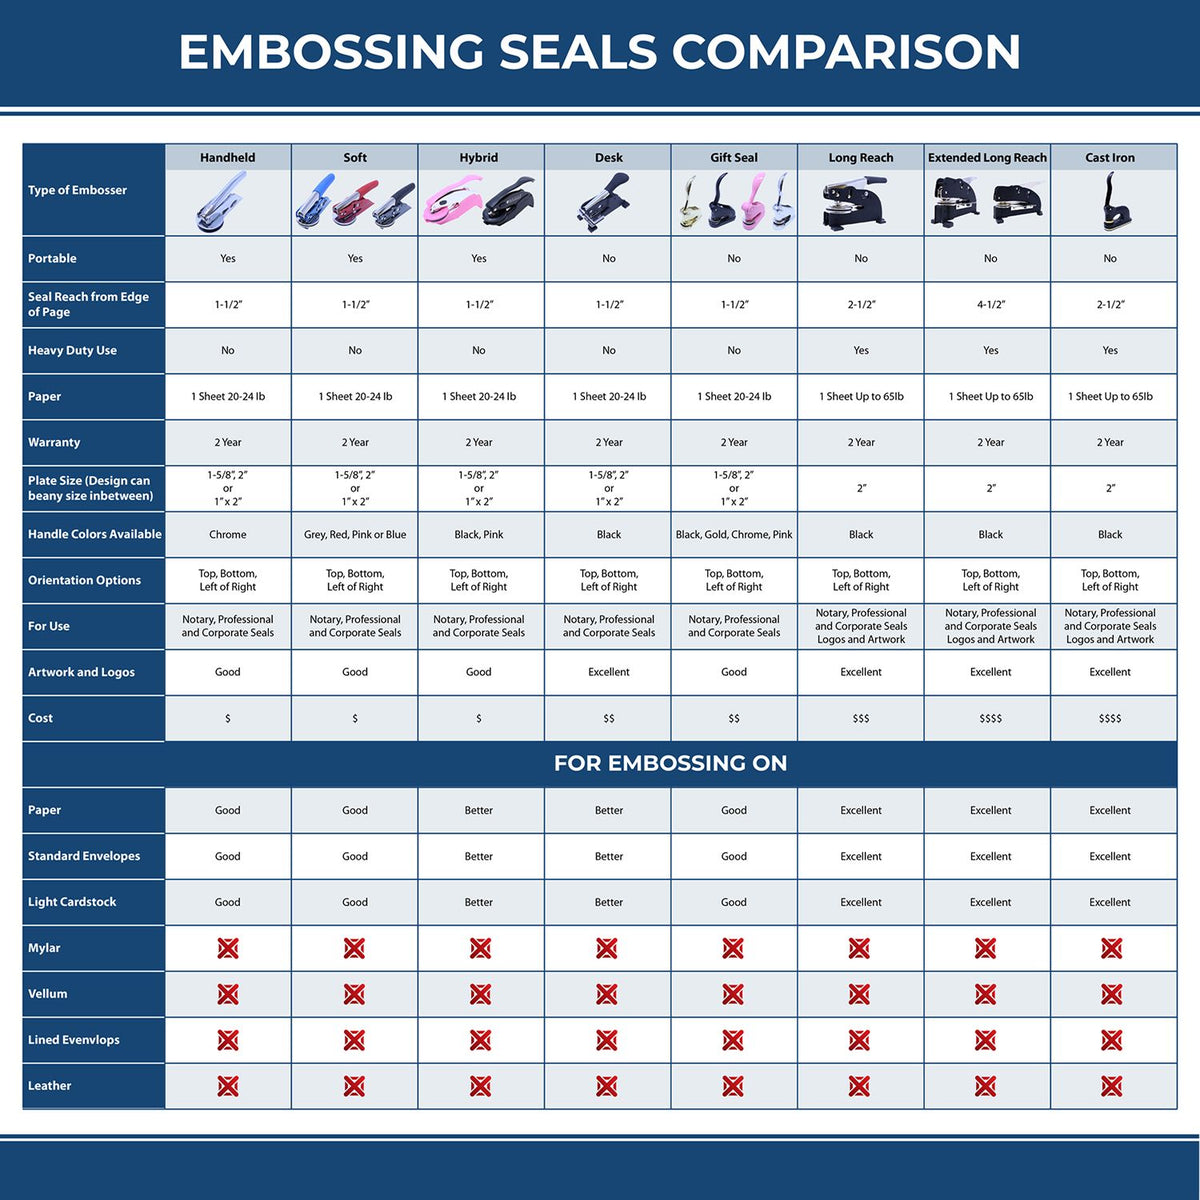 A comparison chart for the different types of mount models available for the Long Reach Missouri Land Surveyor Seal.